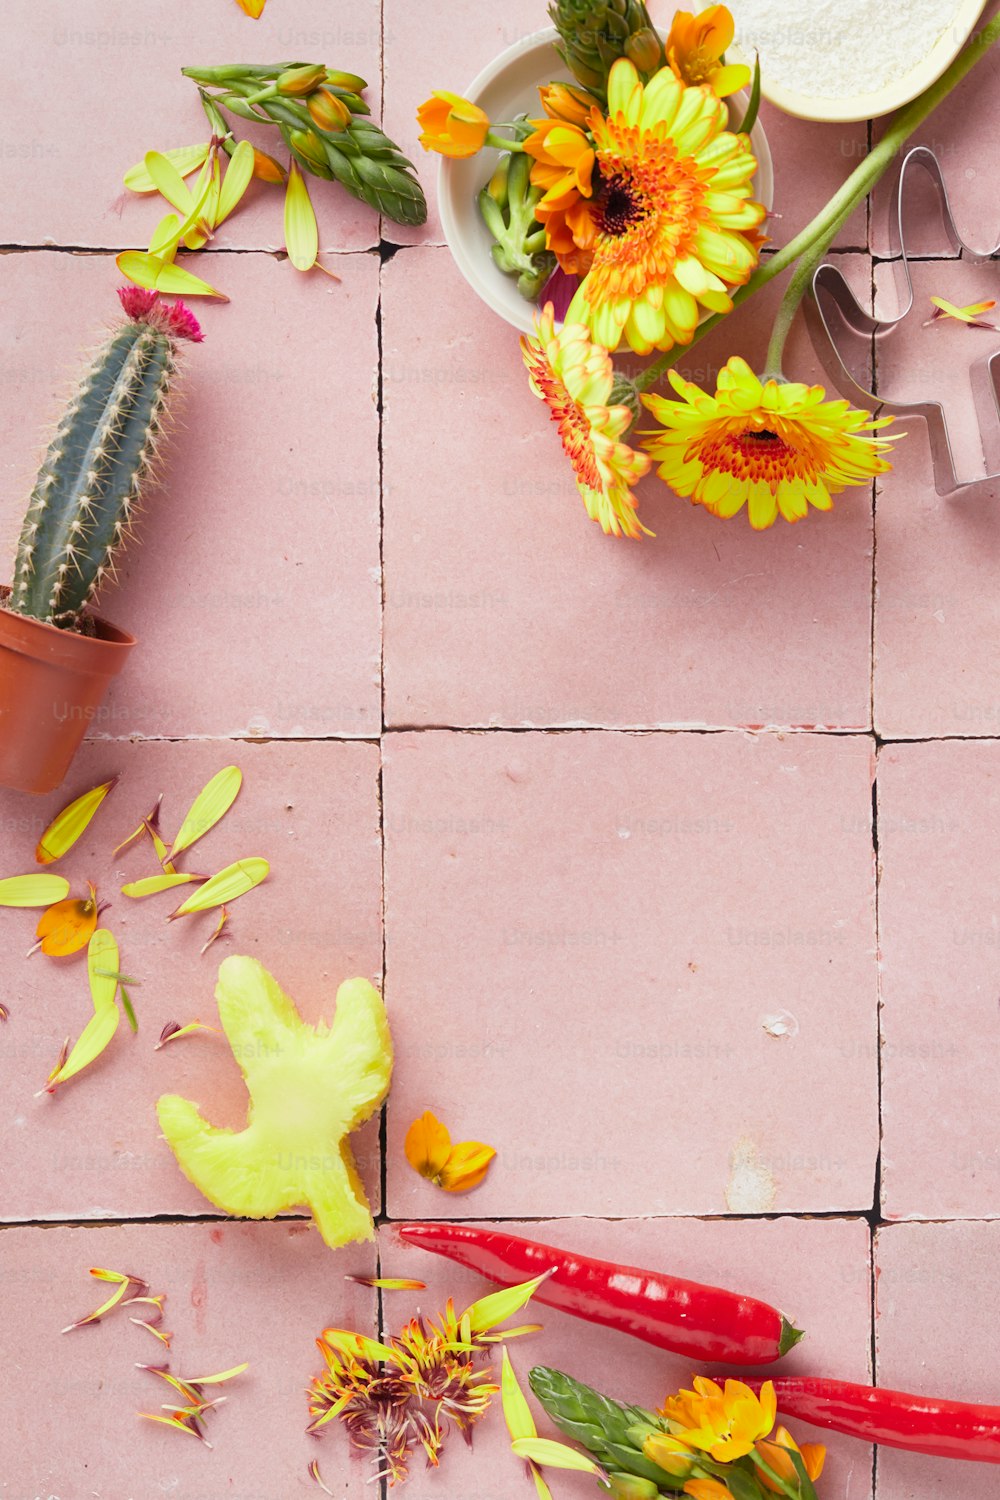 a pink tiled floor with flowers and scissors on it